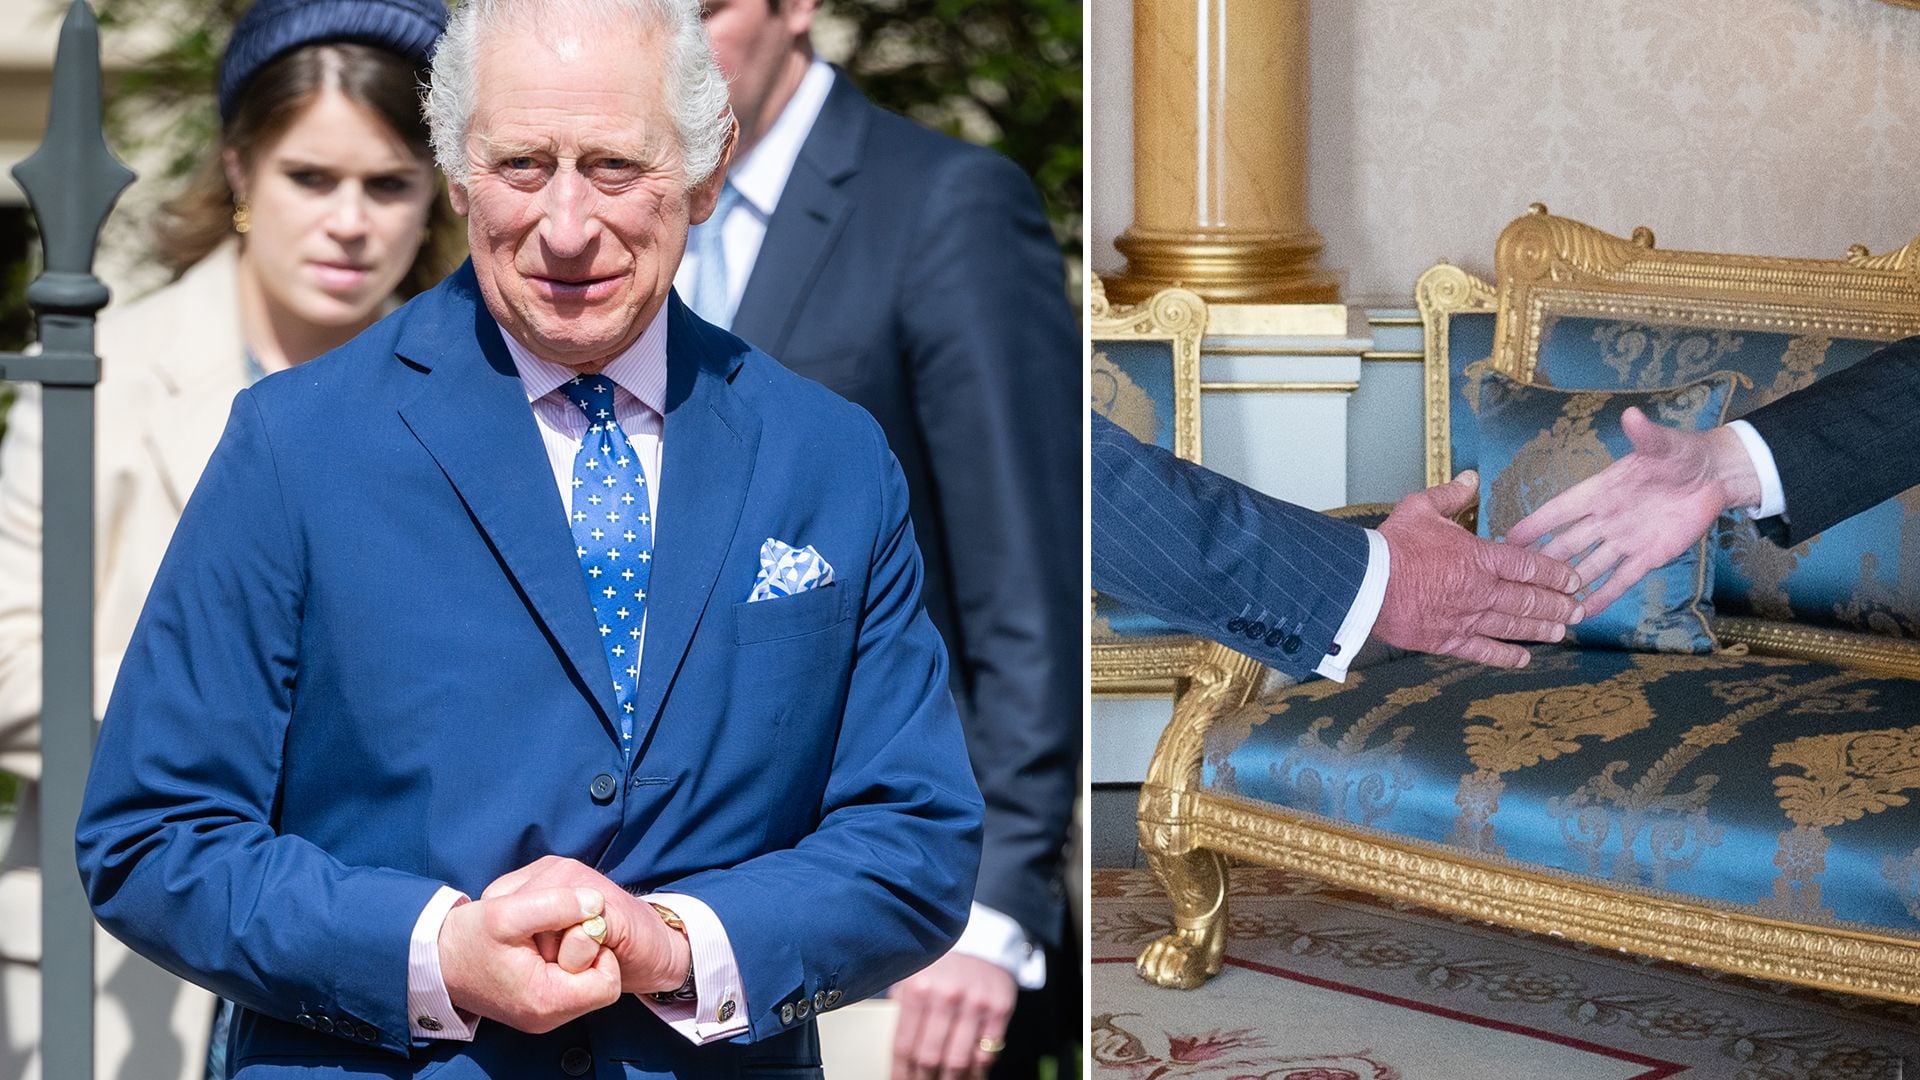 King Charles III's and a close up of his hands